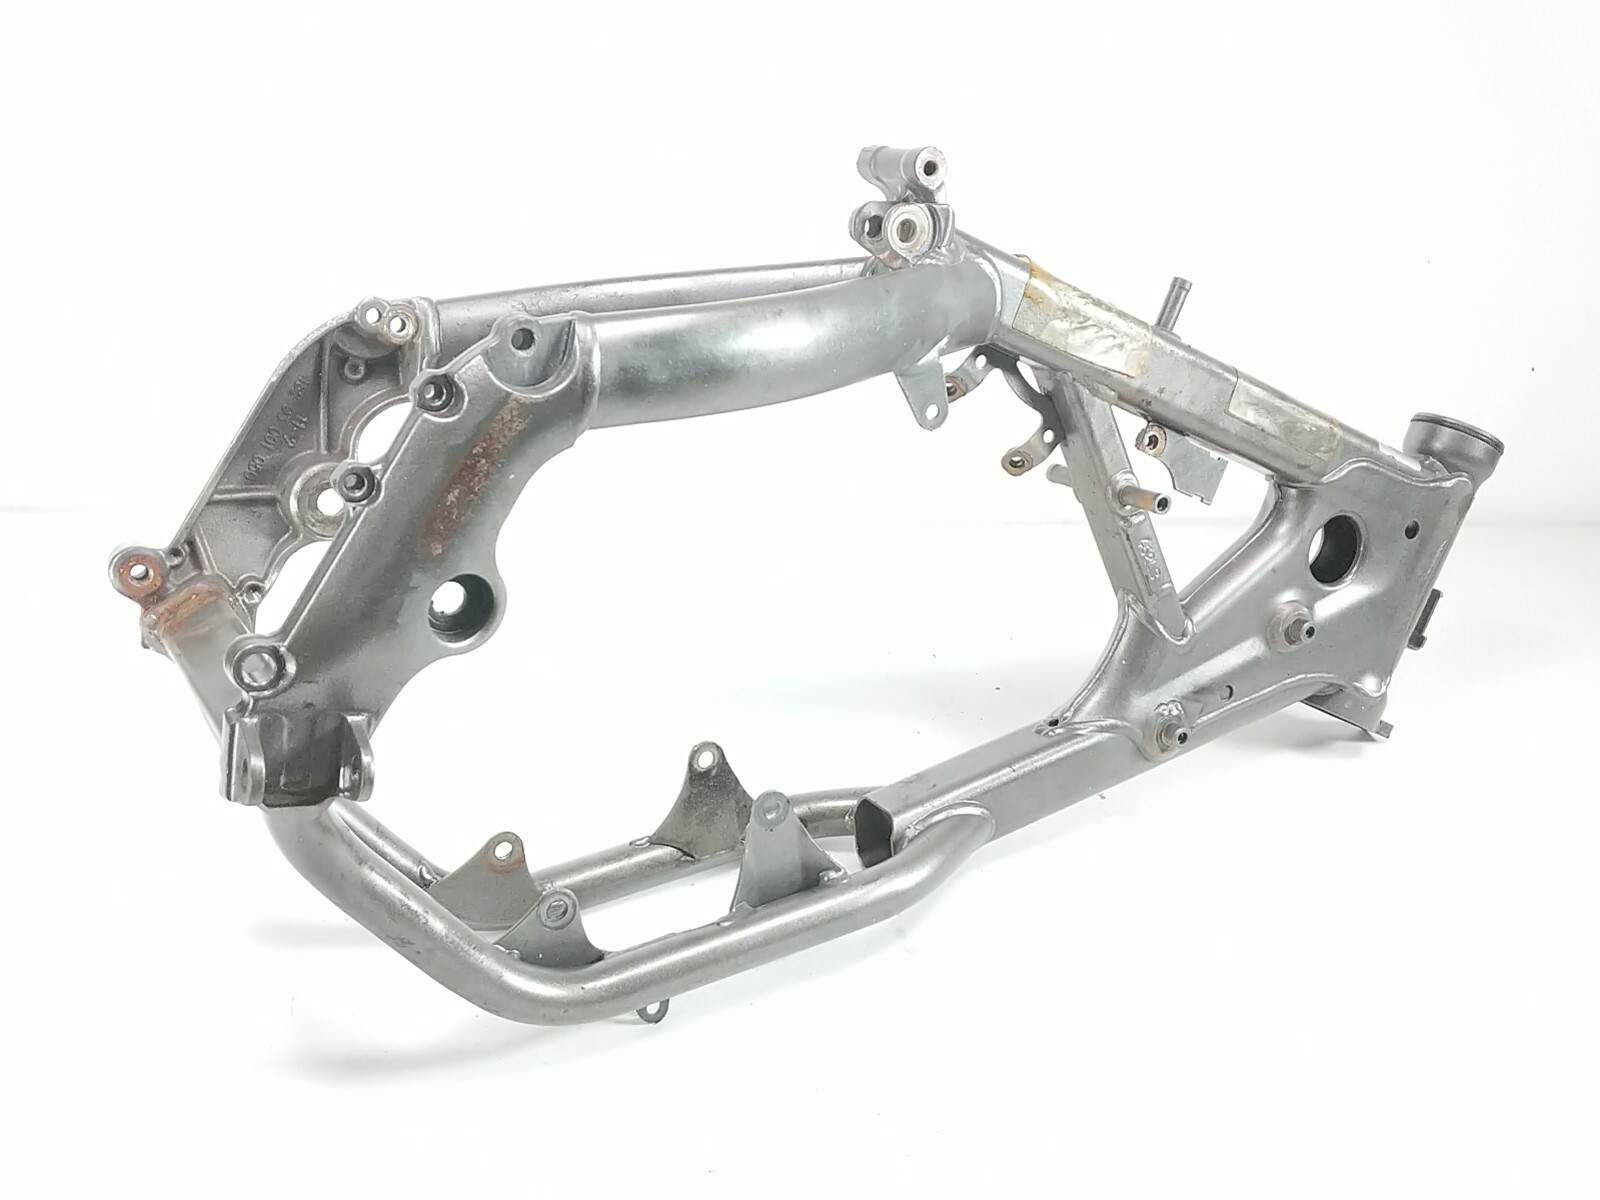 13 KTM 65 SX Main Frame Chassis (STRAIGHT) 46203001051 BOS